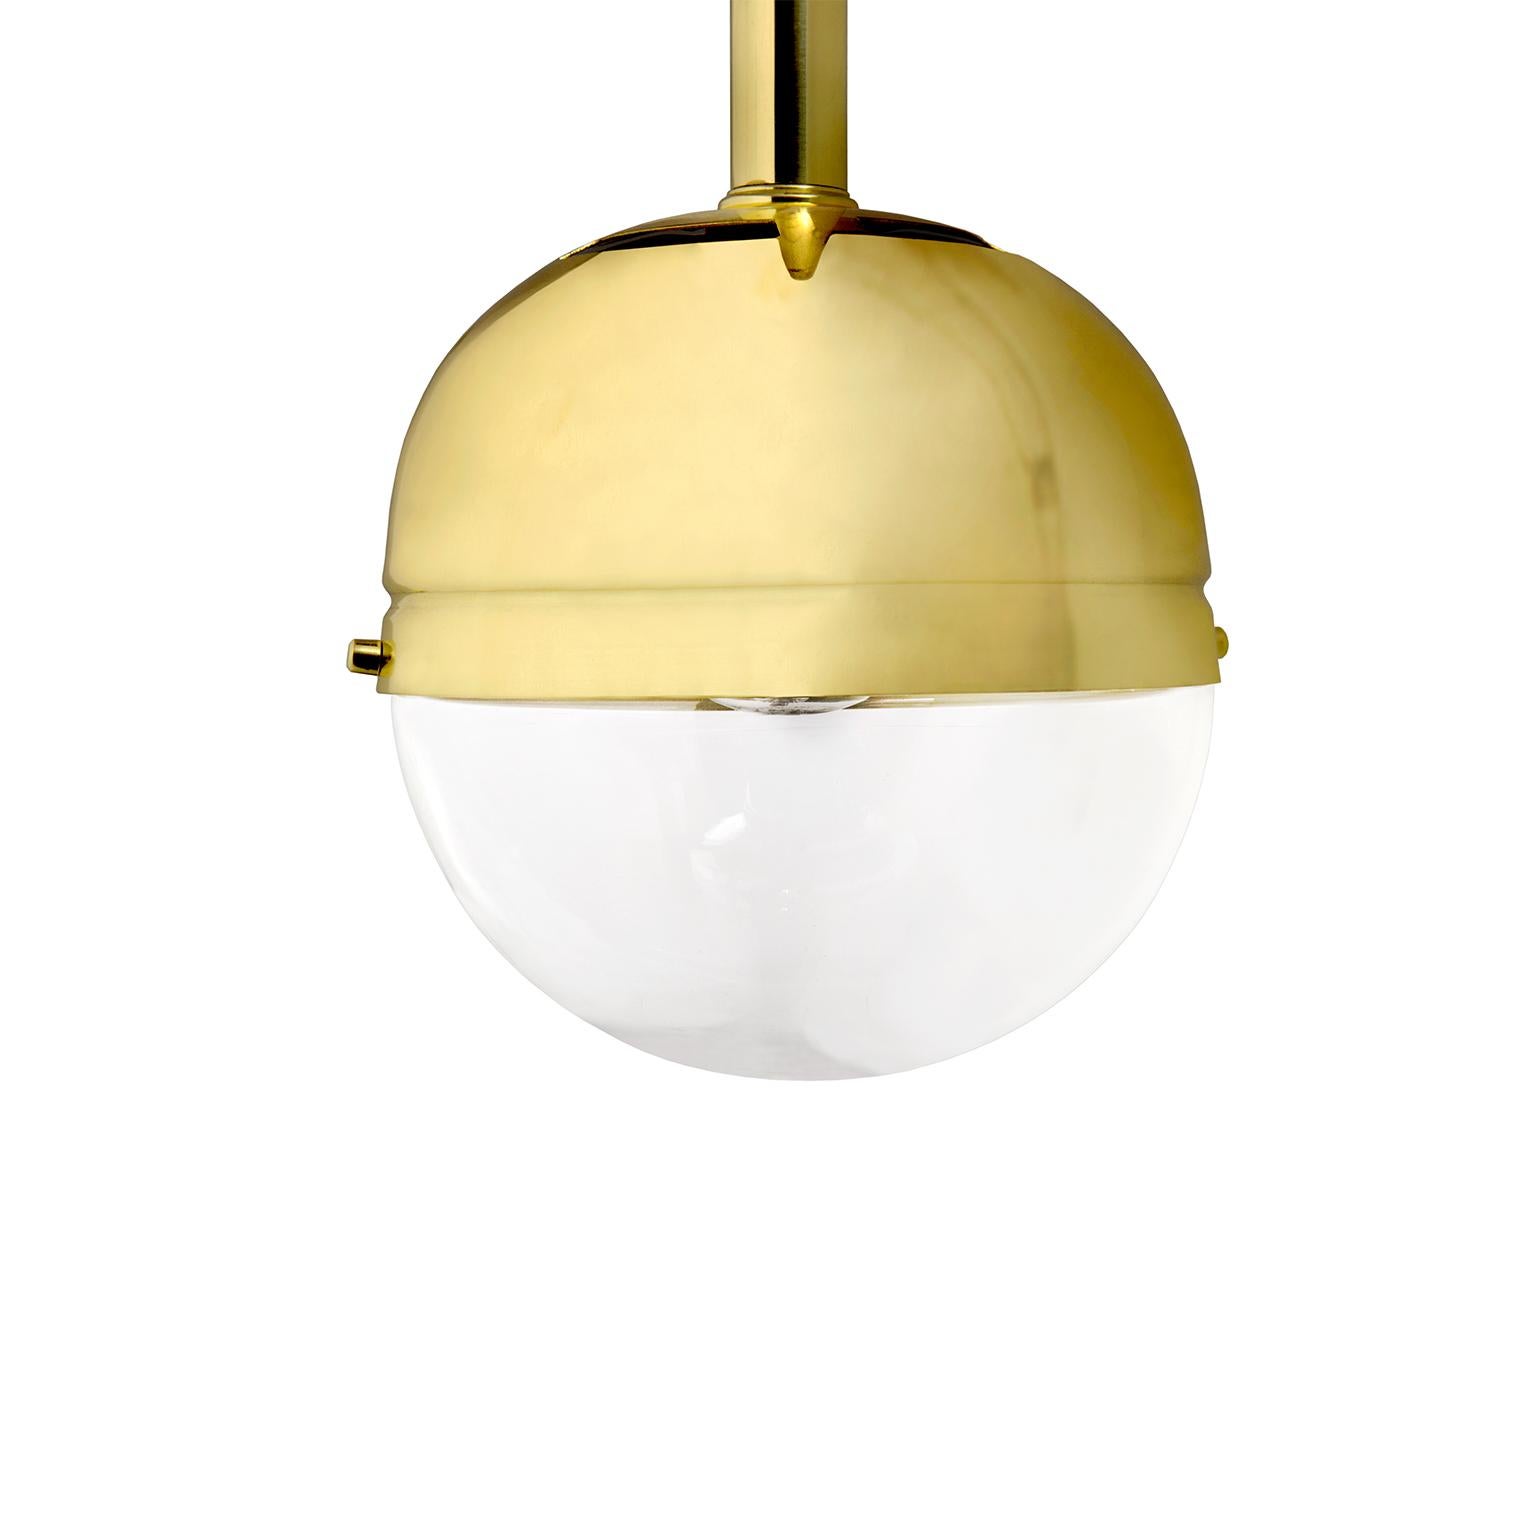 Part of the Kiribati islands group, Nikumaroro is known for its incredible coral atoll. It’s the beauty of its corals that make NIKU Pendant Light a rarity in contemporary lighting. Featuring a structure in gold-plated brass, shaders in gold-plated